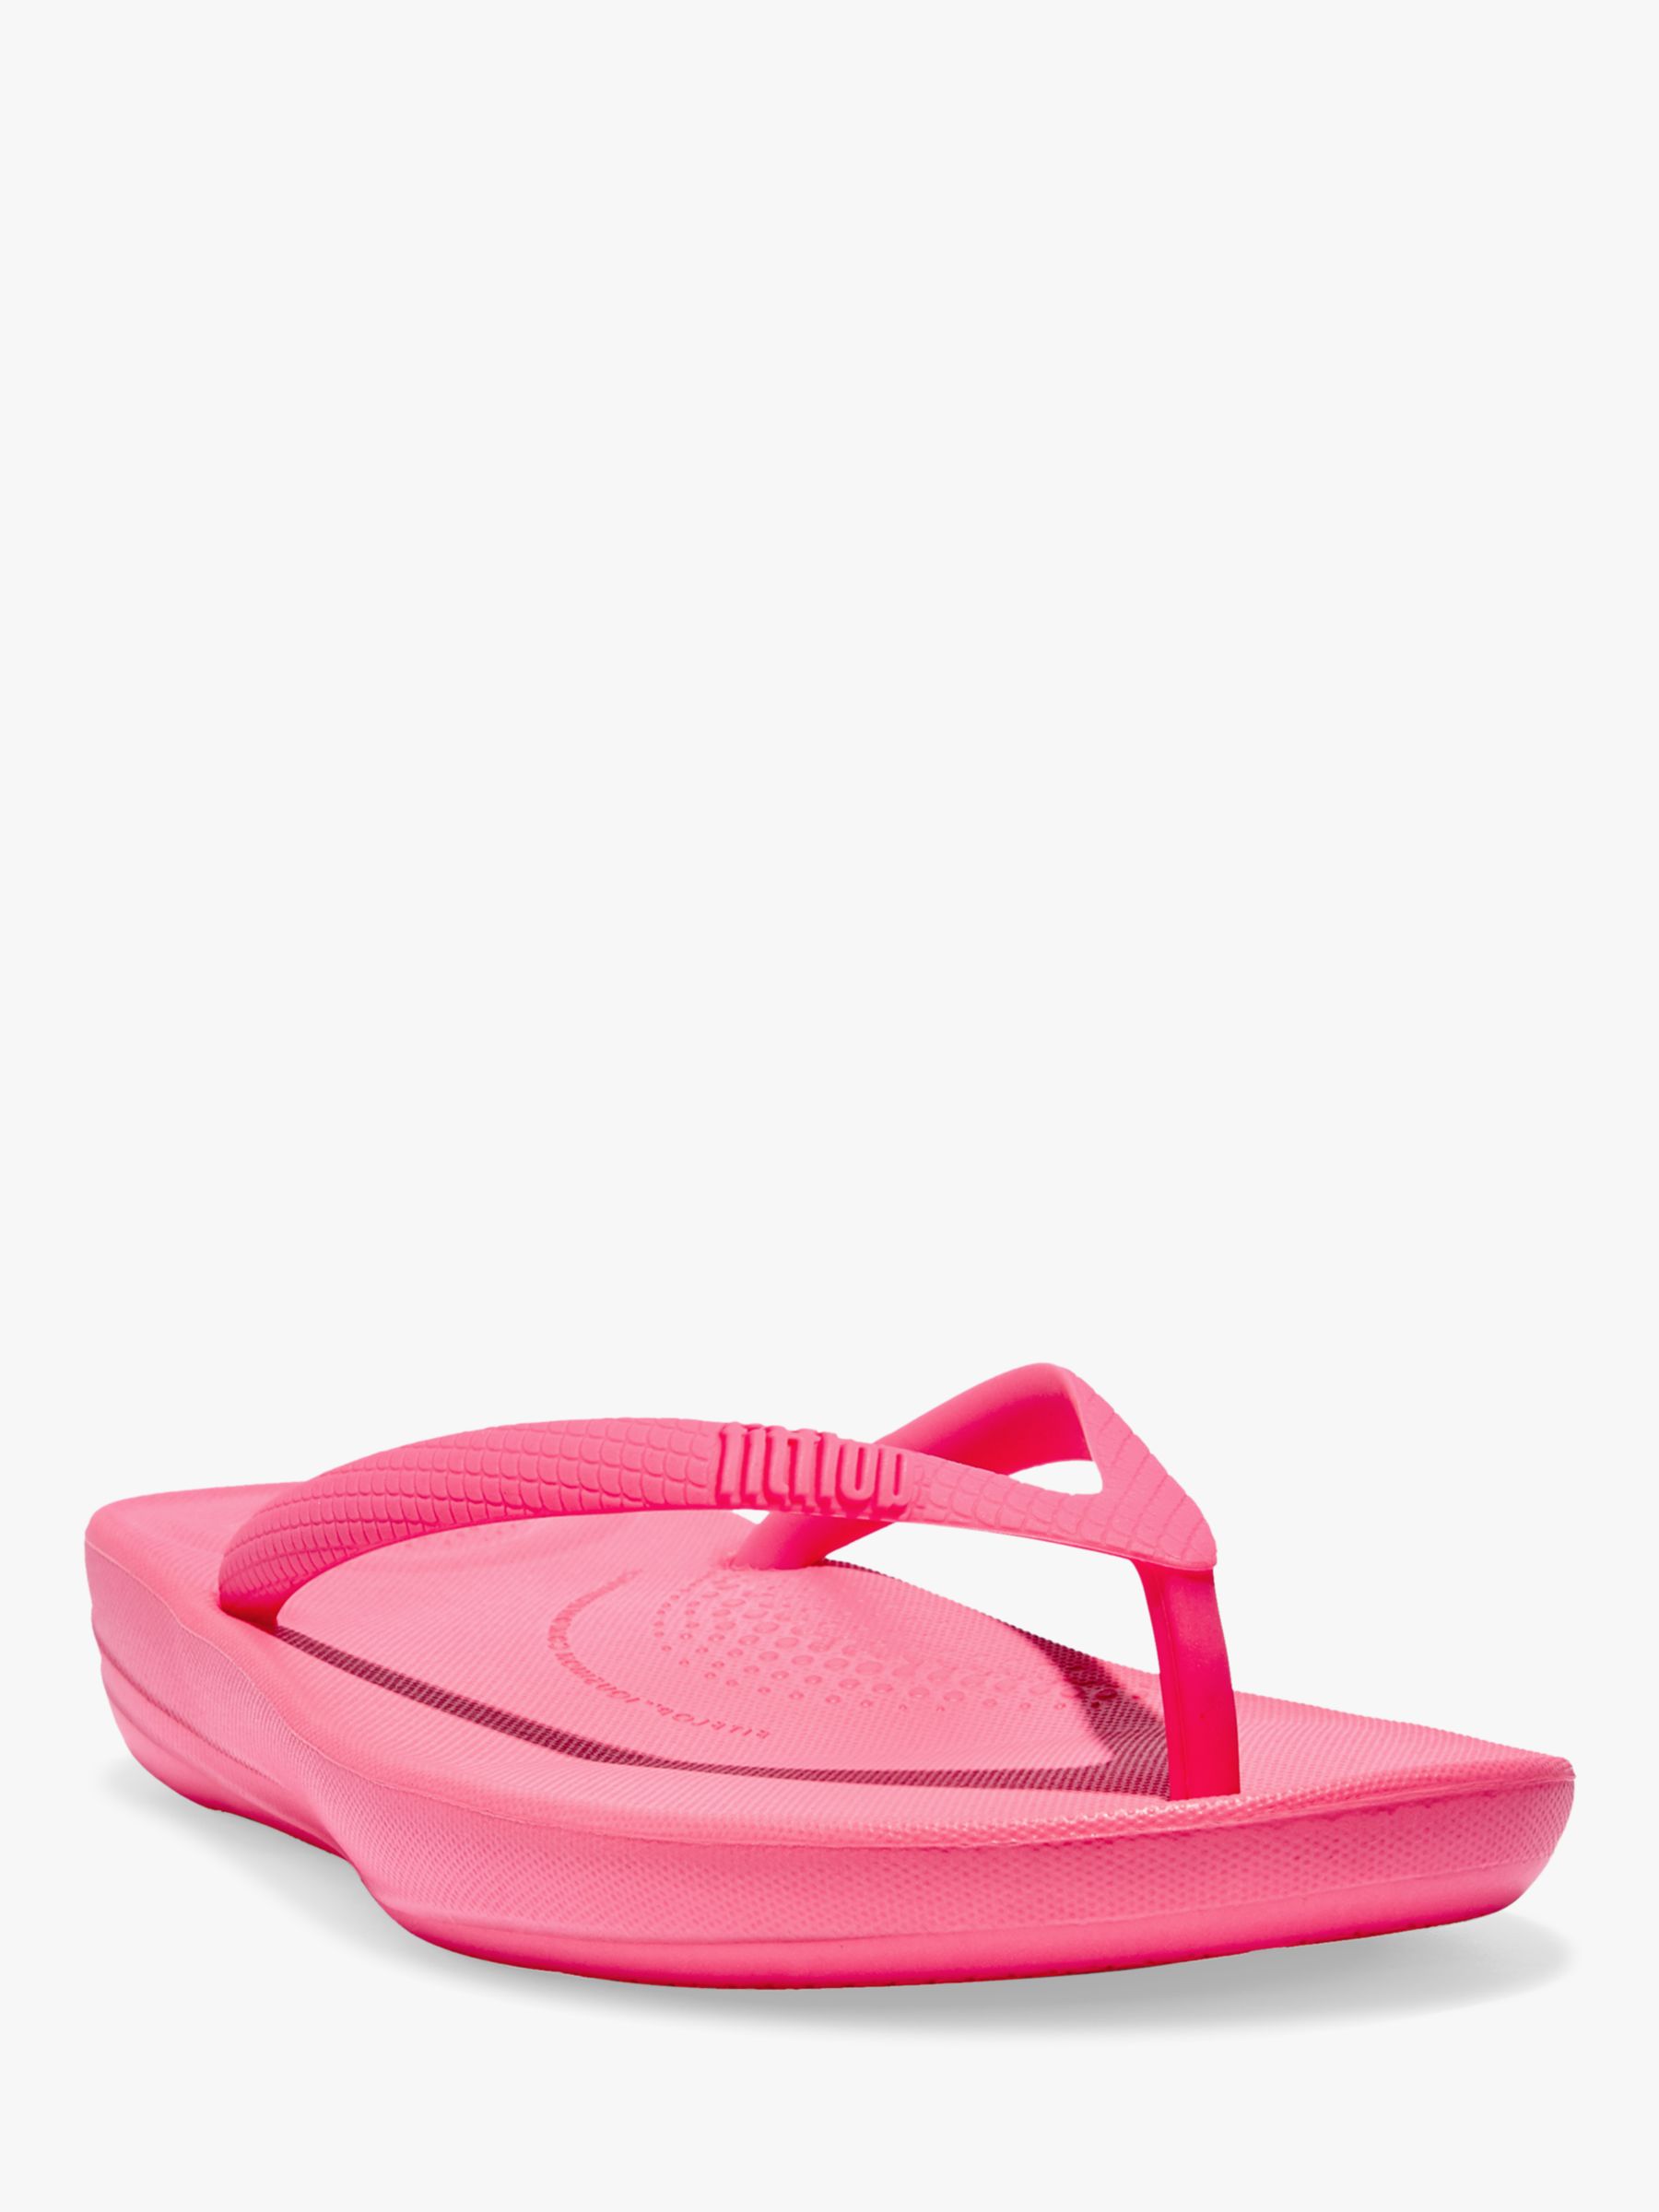 FitFlop IQushion Flip Flops, Pop Pink at John Lewis & Partners